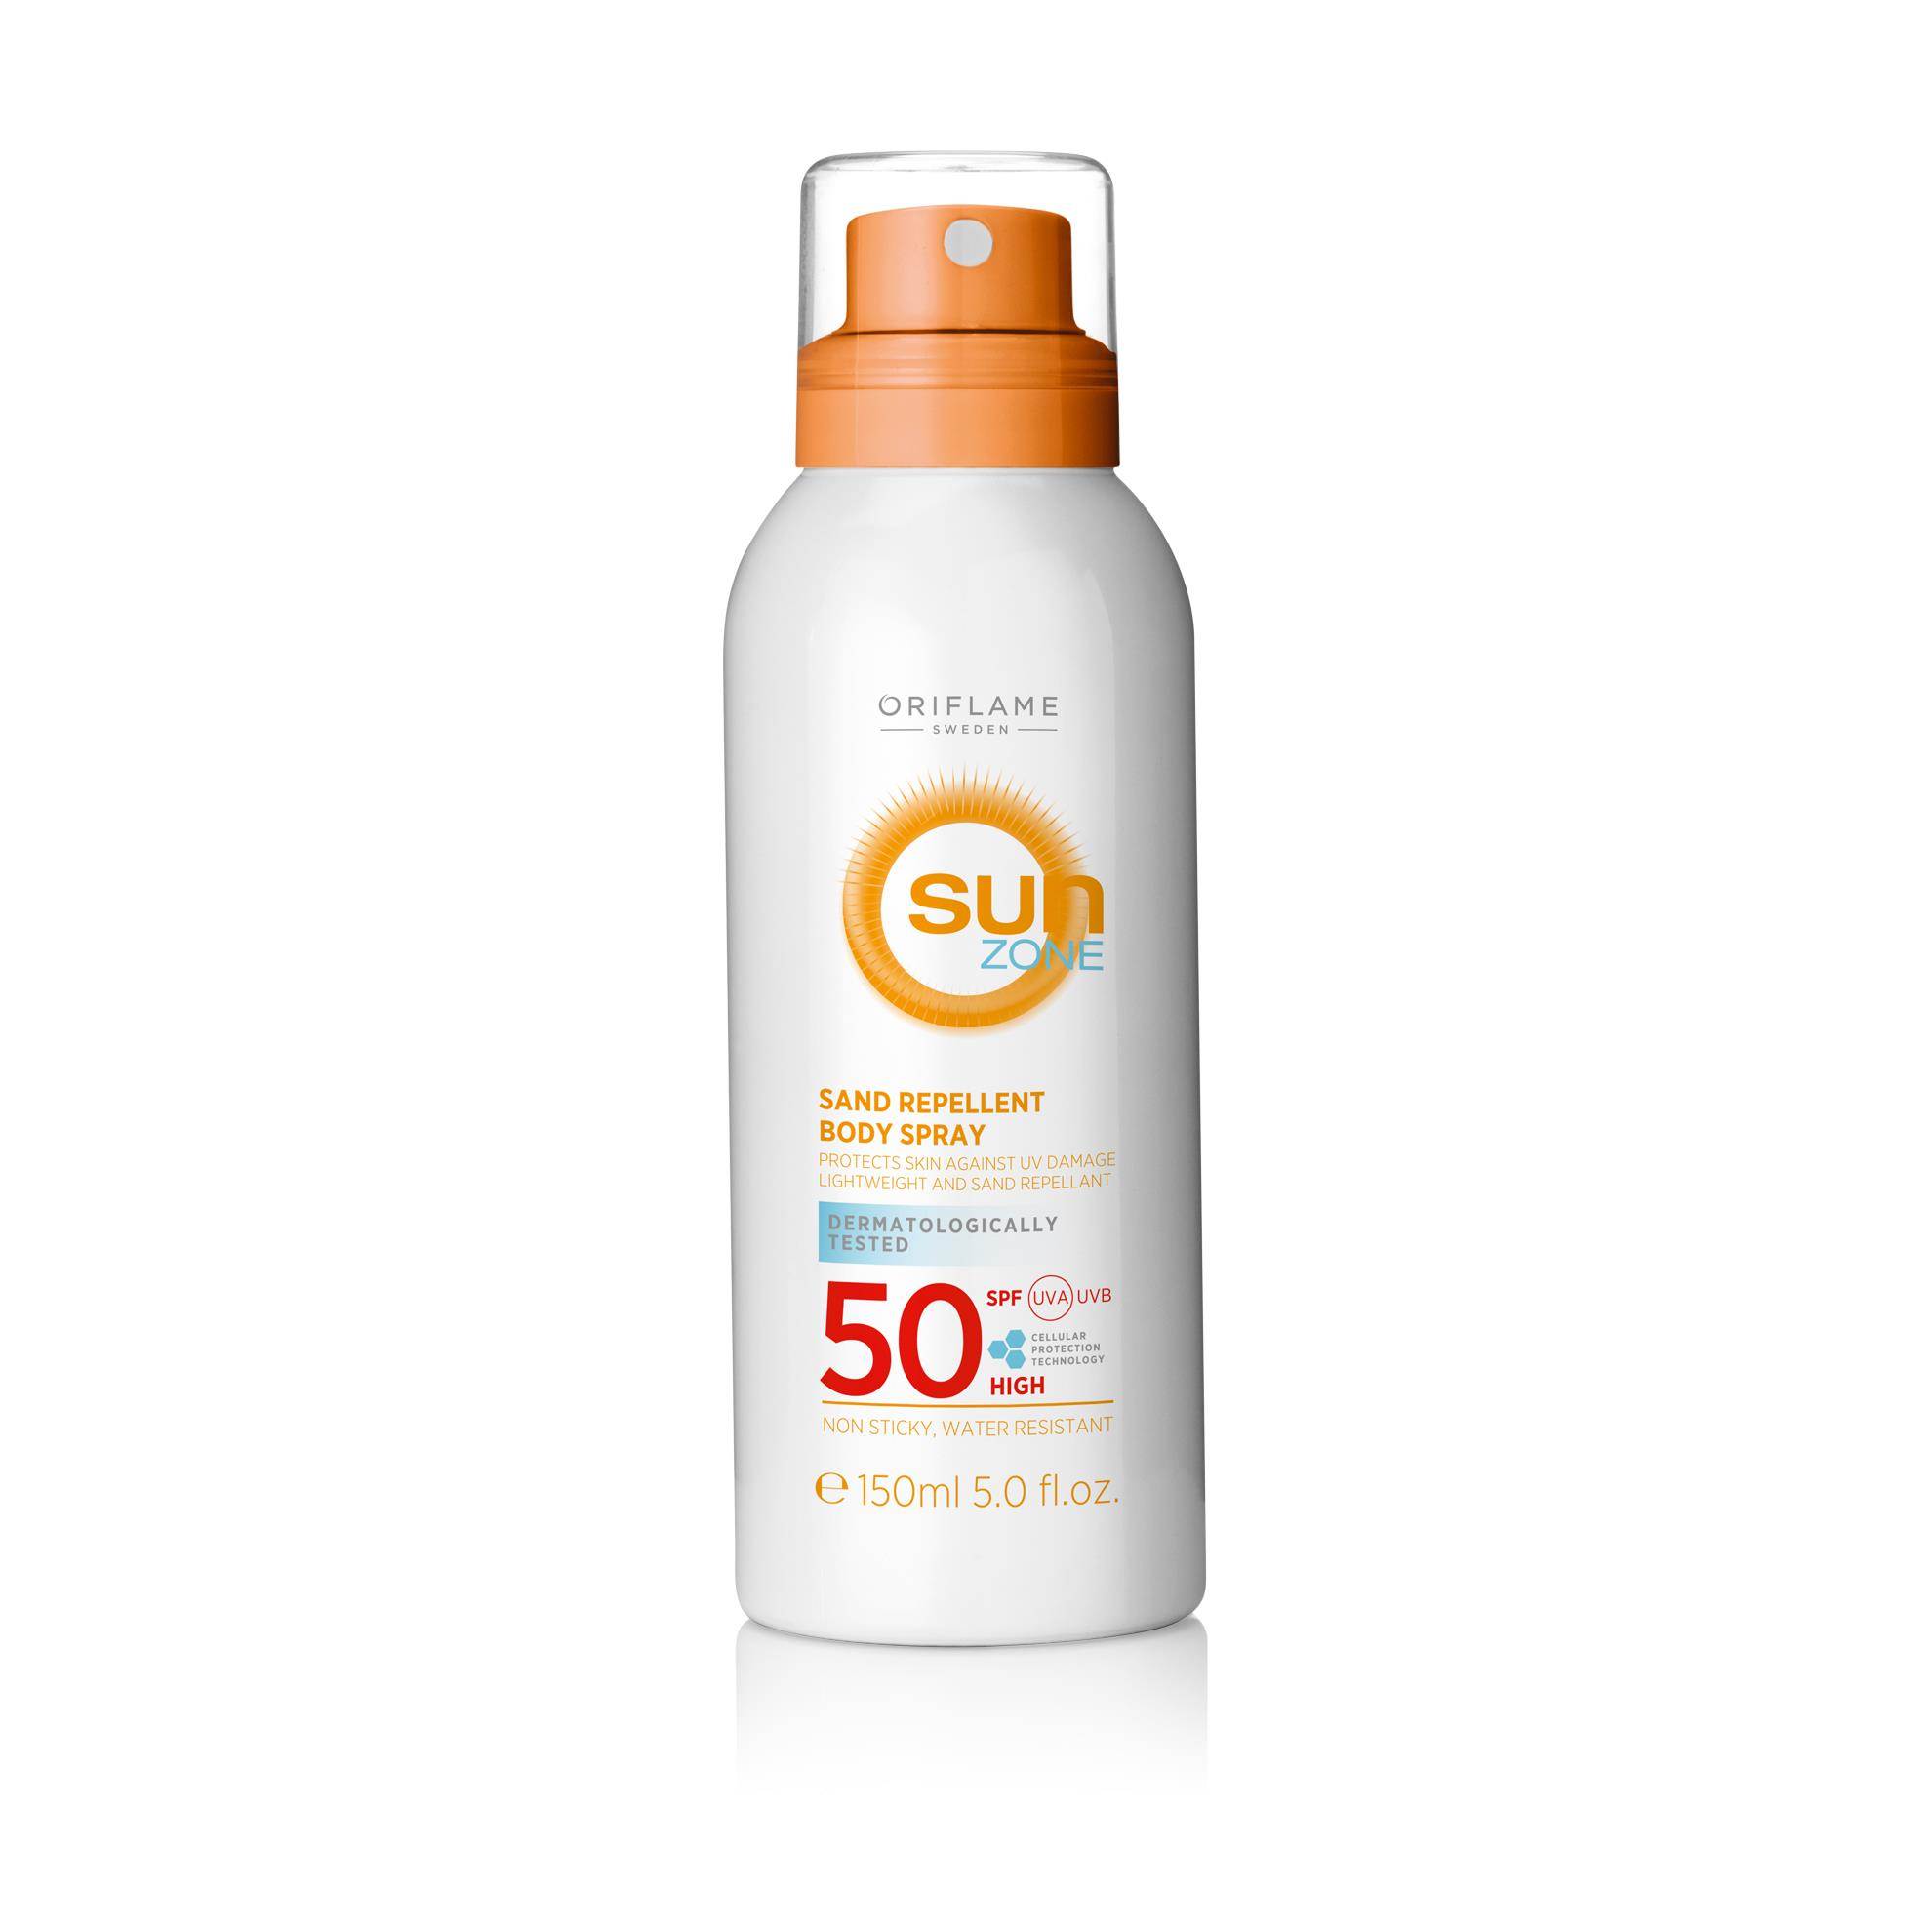 Xịt Chống Nắng Sun Zone Sand Repellent Body Spray SPF 50 HIGH